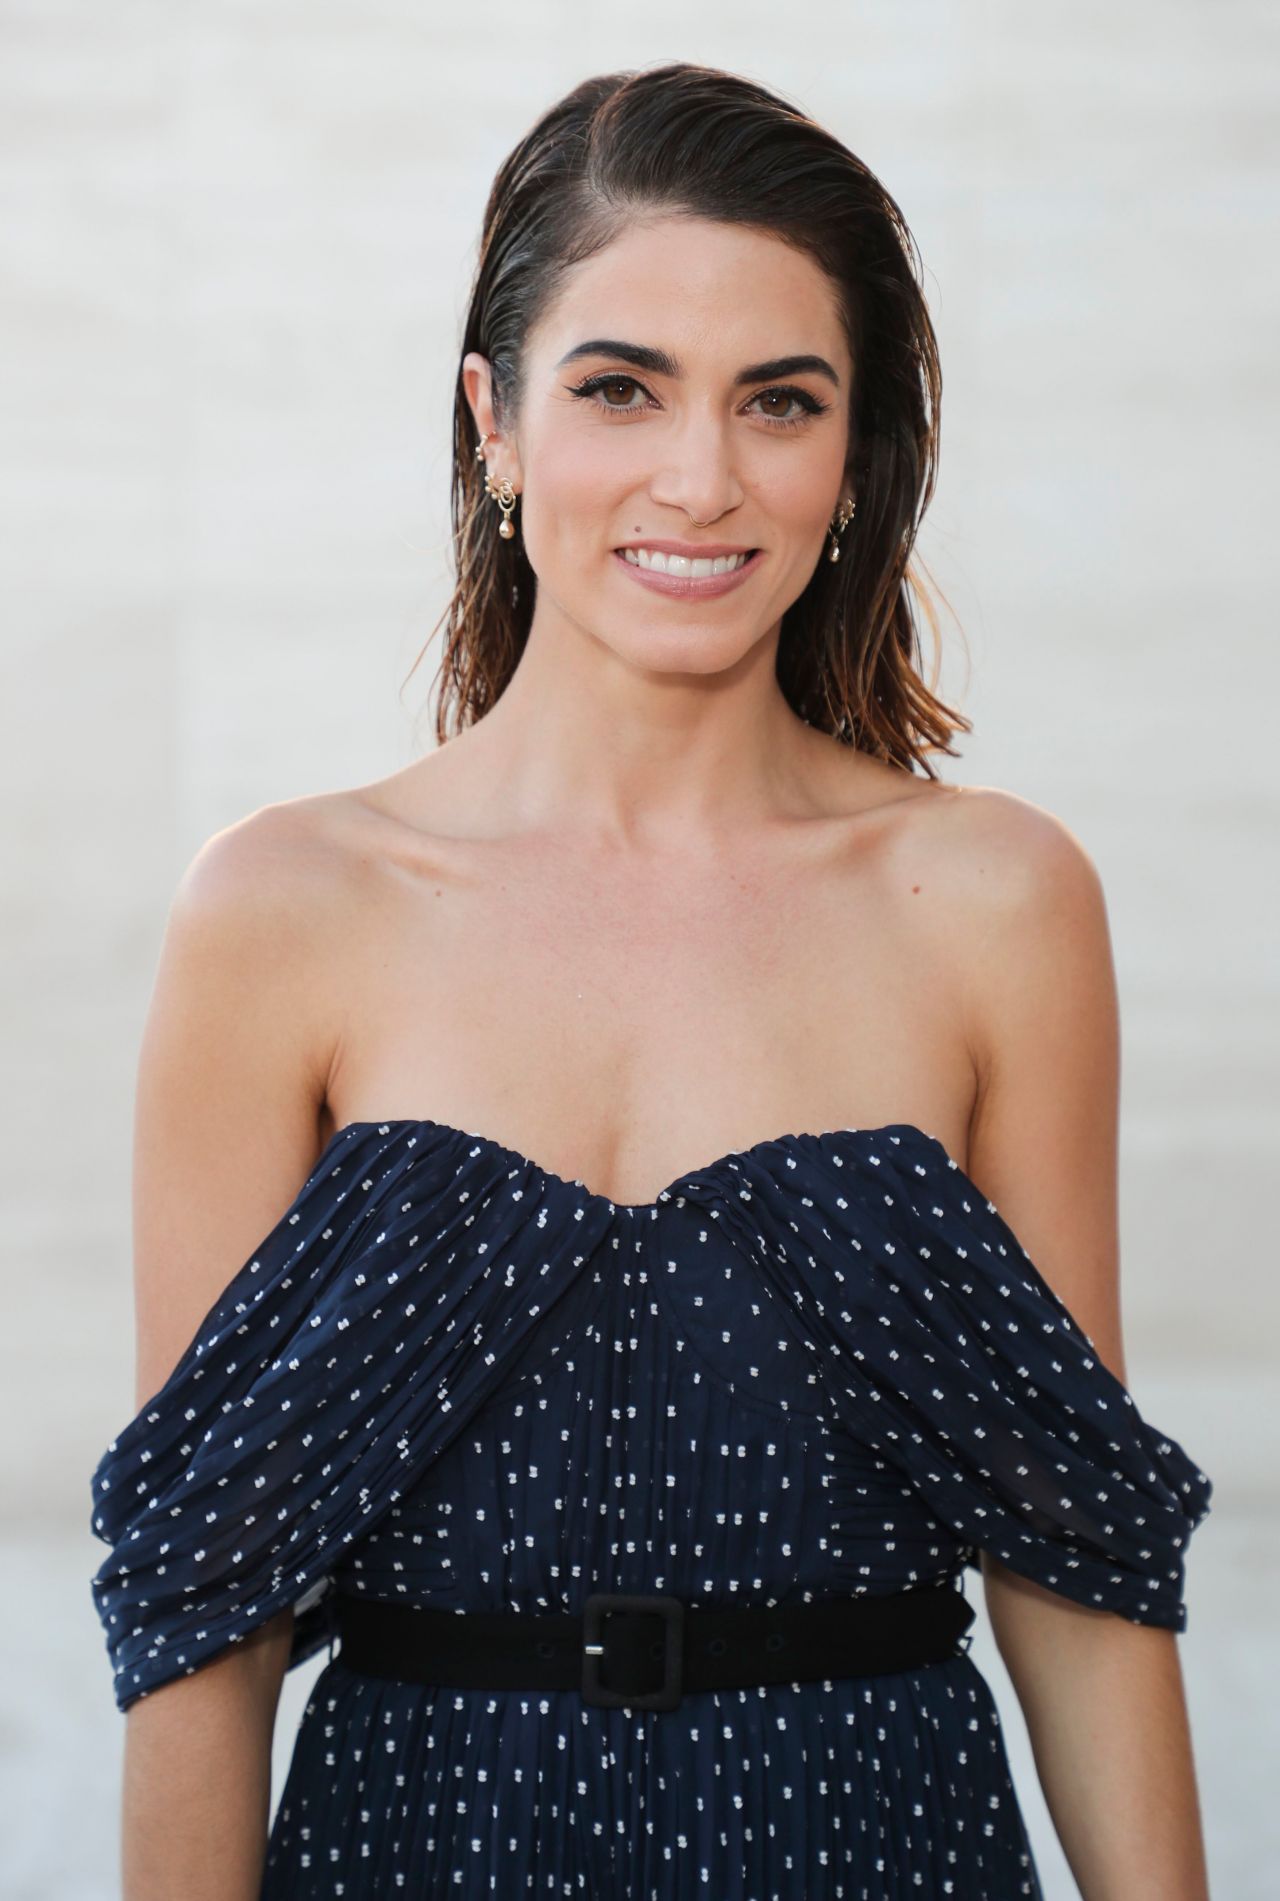 Nikki Reed – Women in Conservation Event in LA 06/08/2019